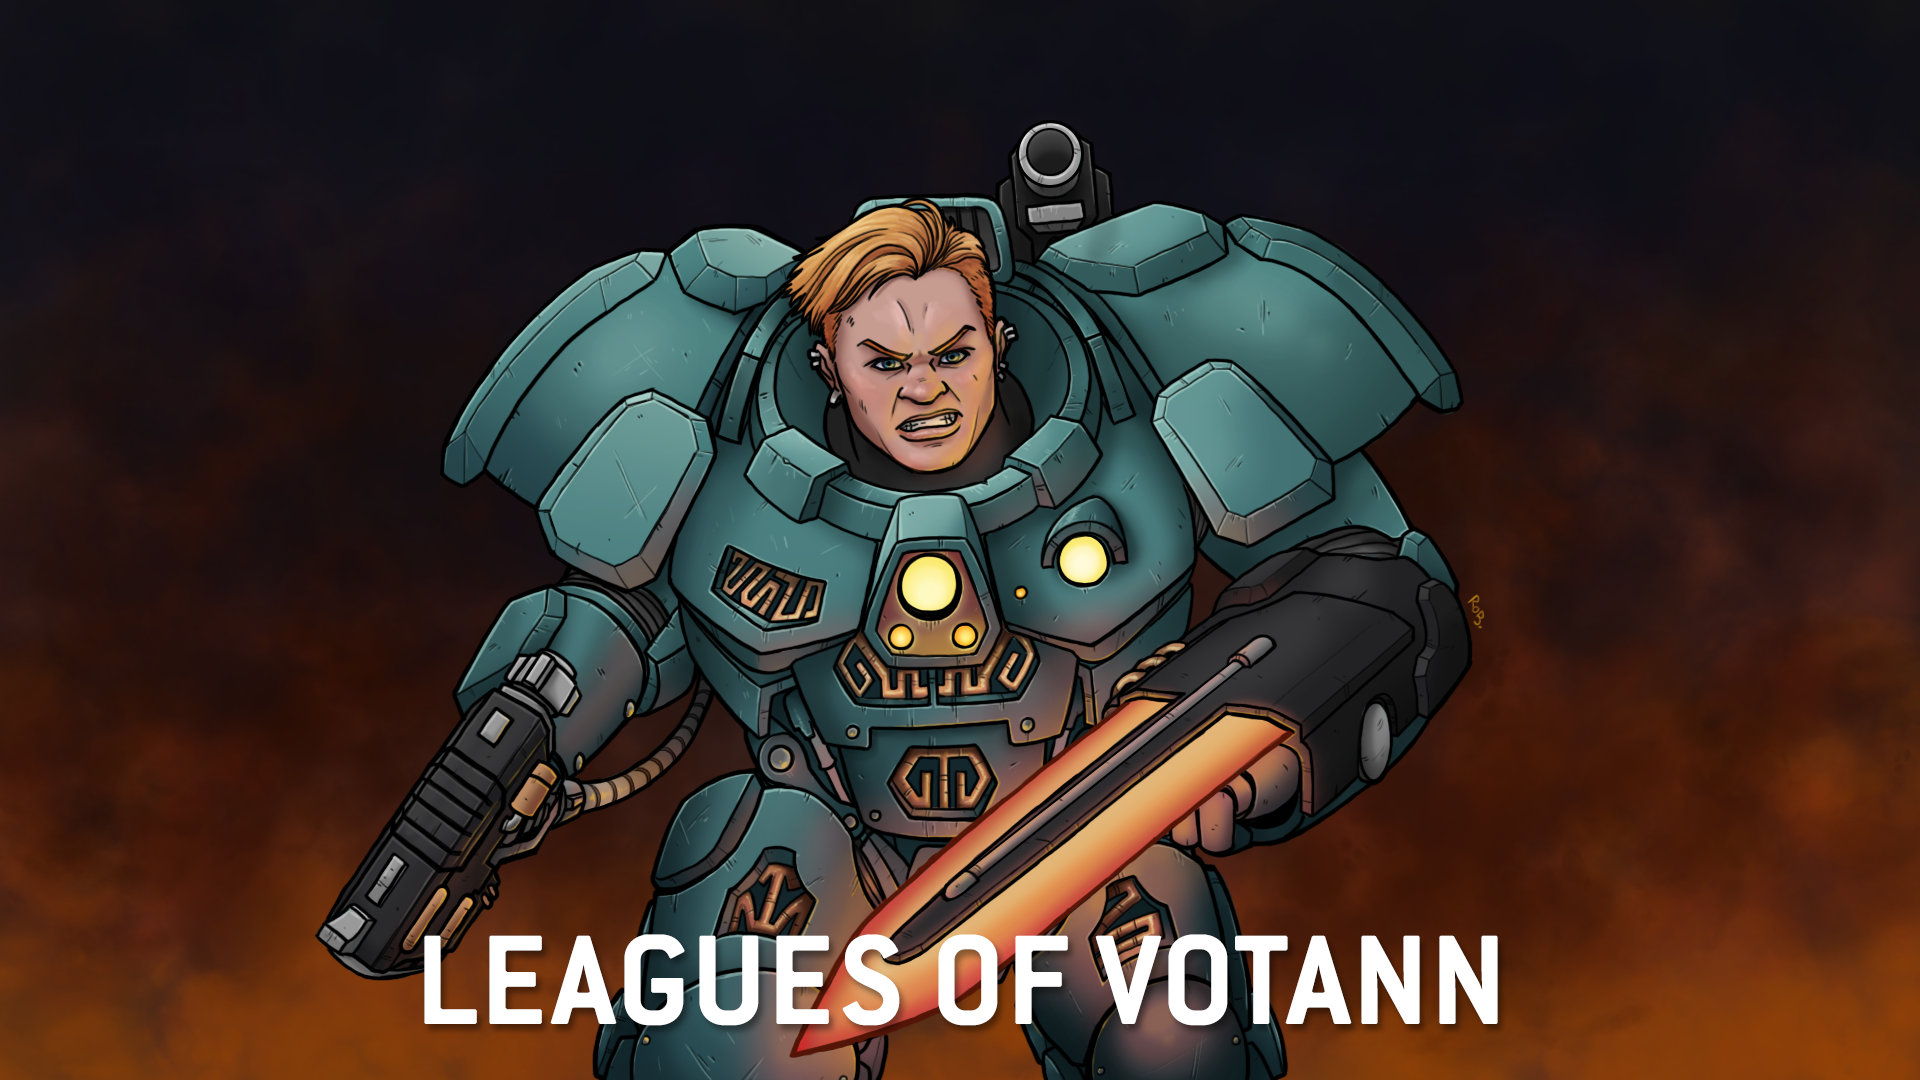 Welcome to the Big Leagues – Who Are the Five Biggest Leagues of Votann? -  Warhammer Community